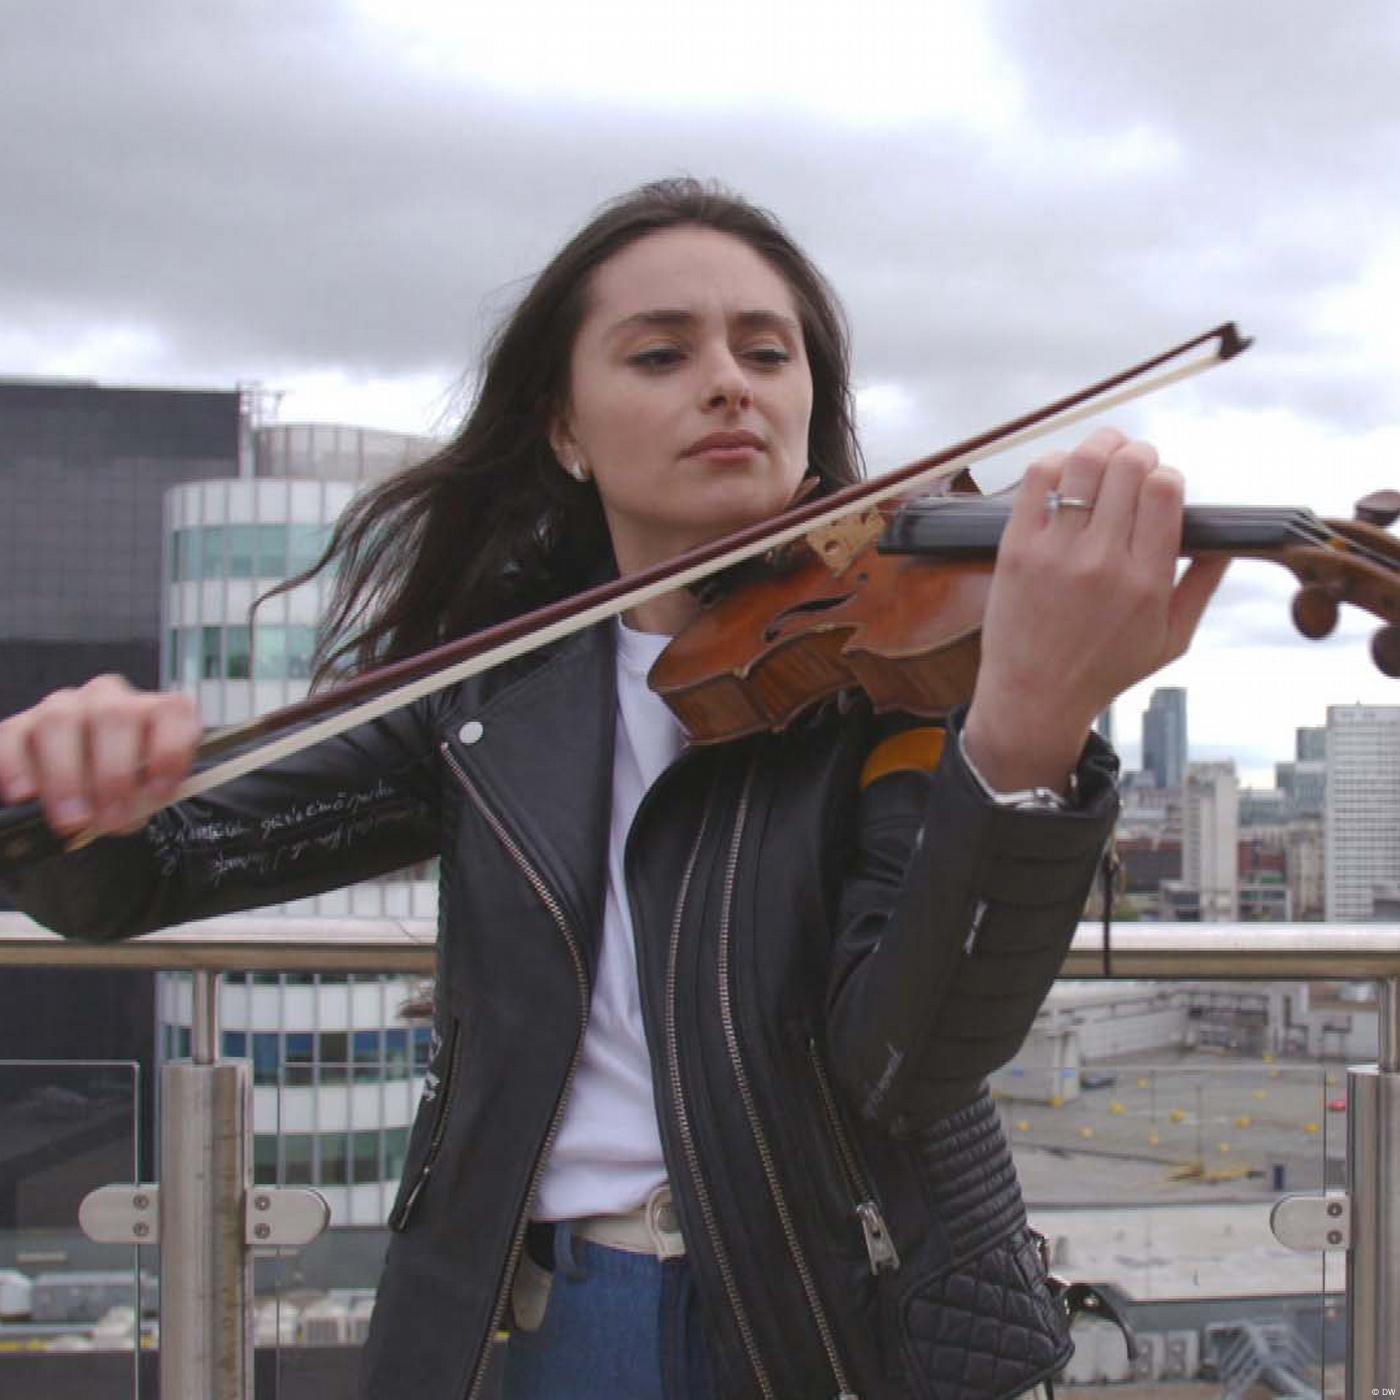 Esther Abrami: Successful violinist and social media star